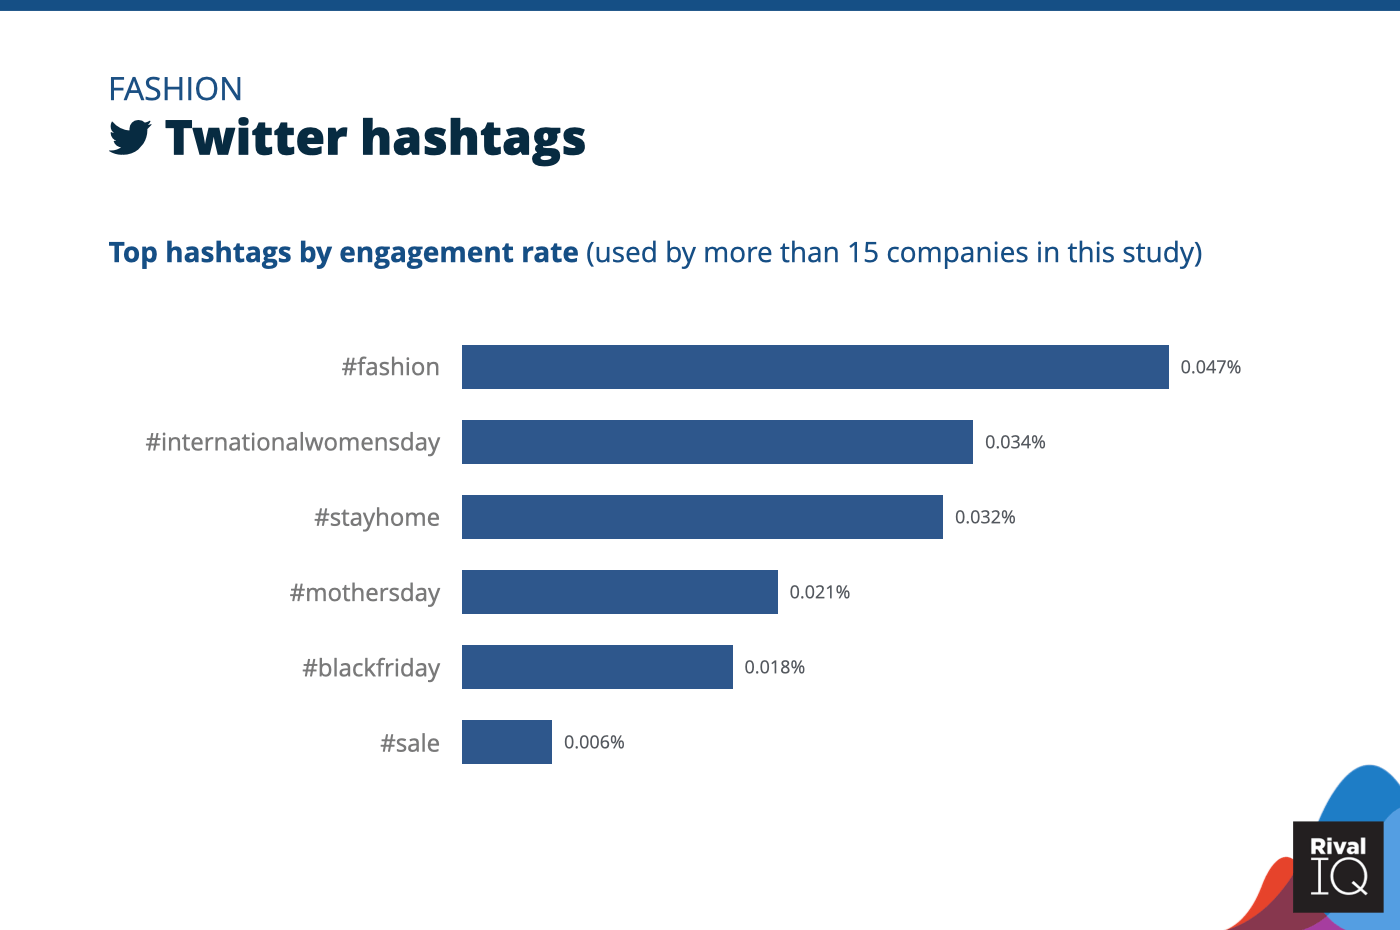 Chart of Top Twitter hashtags by engagement rate, Fashion